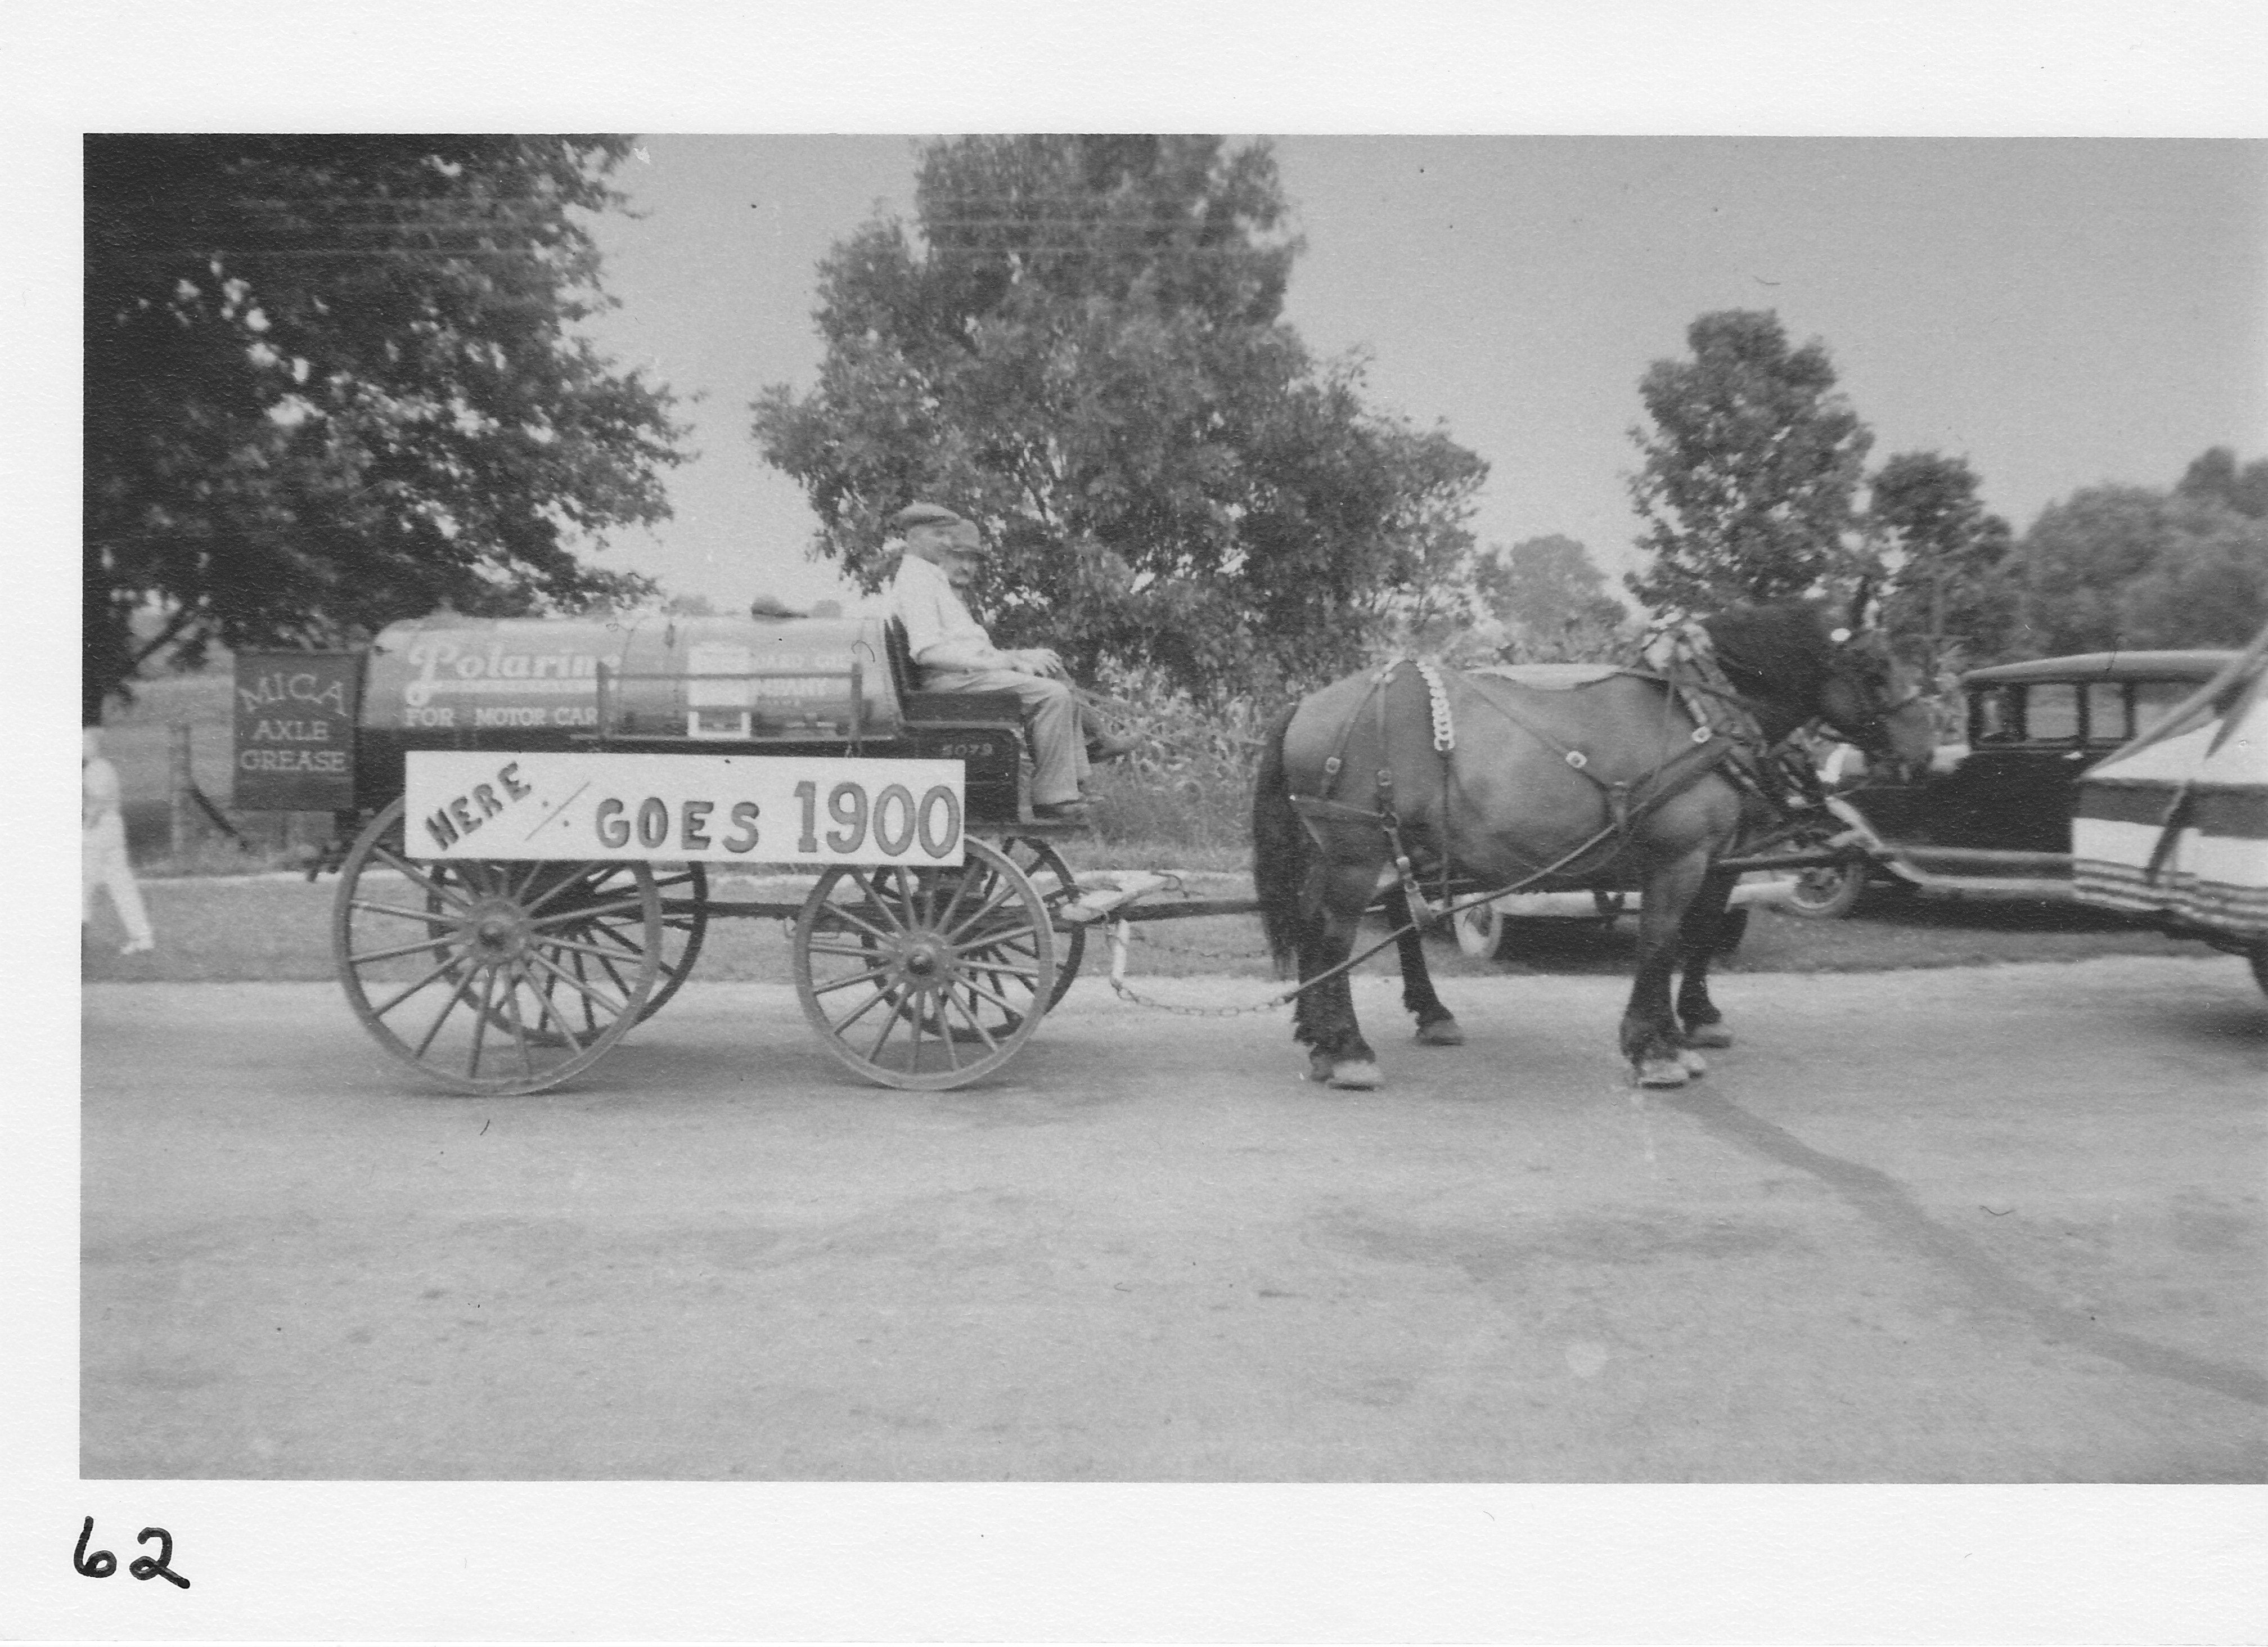 Standard Oil Co. in 1933 parade.  Pat Whaley owner and driver, George Sproull, Roscoe Mercer.  Year 1900 probably signifies beginning of Standard Products.